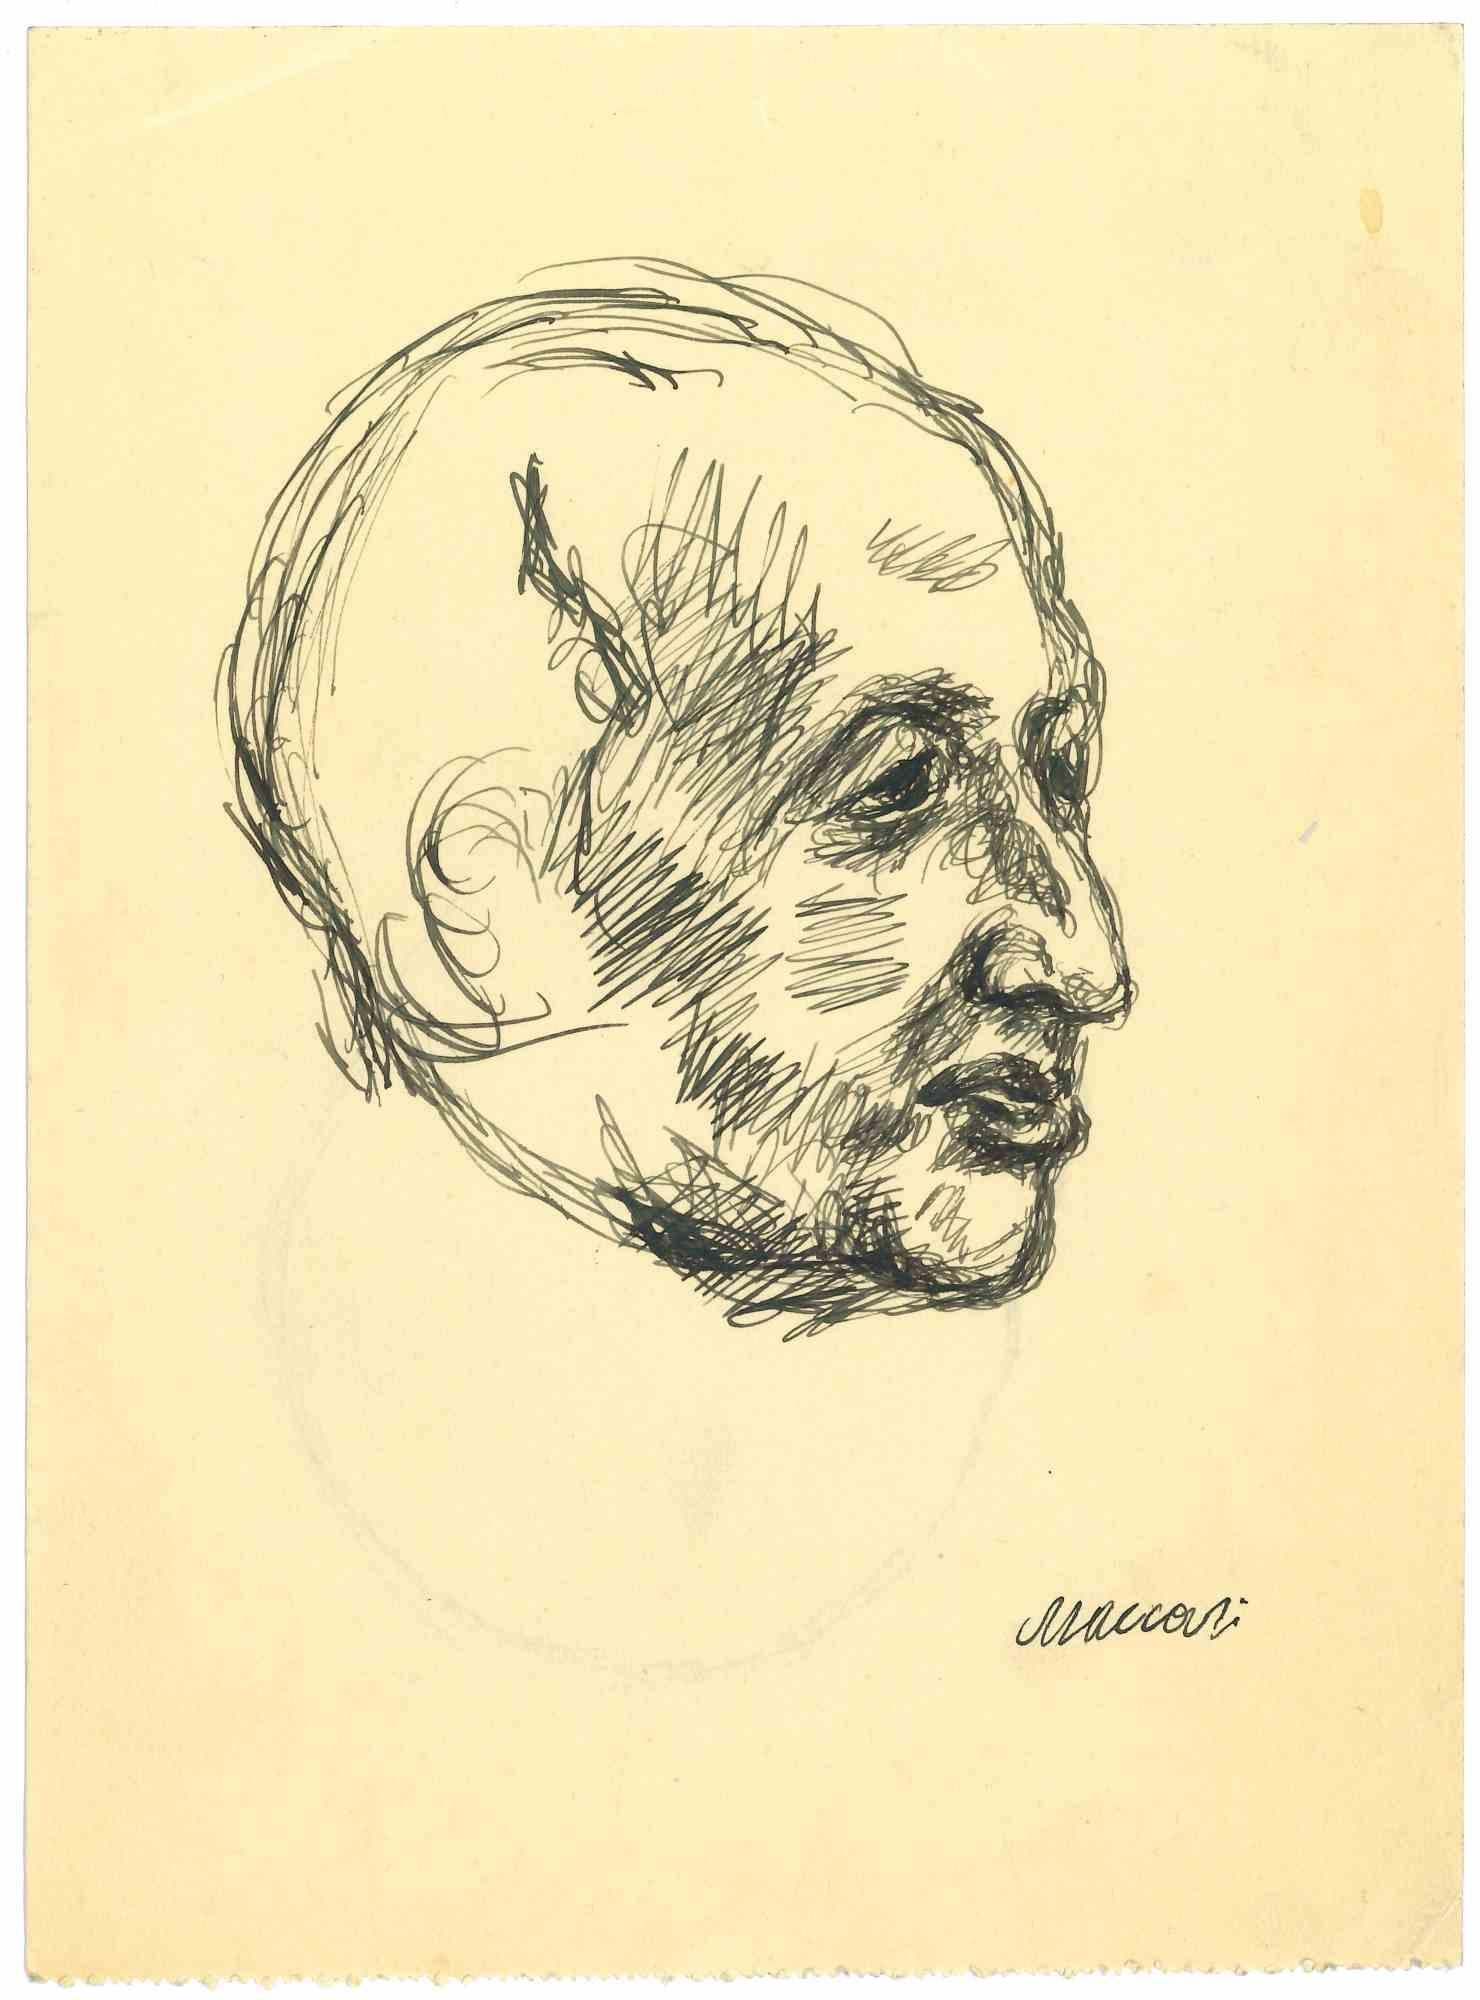 The Profile is an Original Drawing in pen on creamy-colored paper realized by Mino Maccari in the mid-20th century.

Hand-signed by the artist on the lower.

Good conditions.

Mino Maccari (1898-1989) was an Italian writer, painter, engraver, and